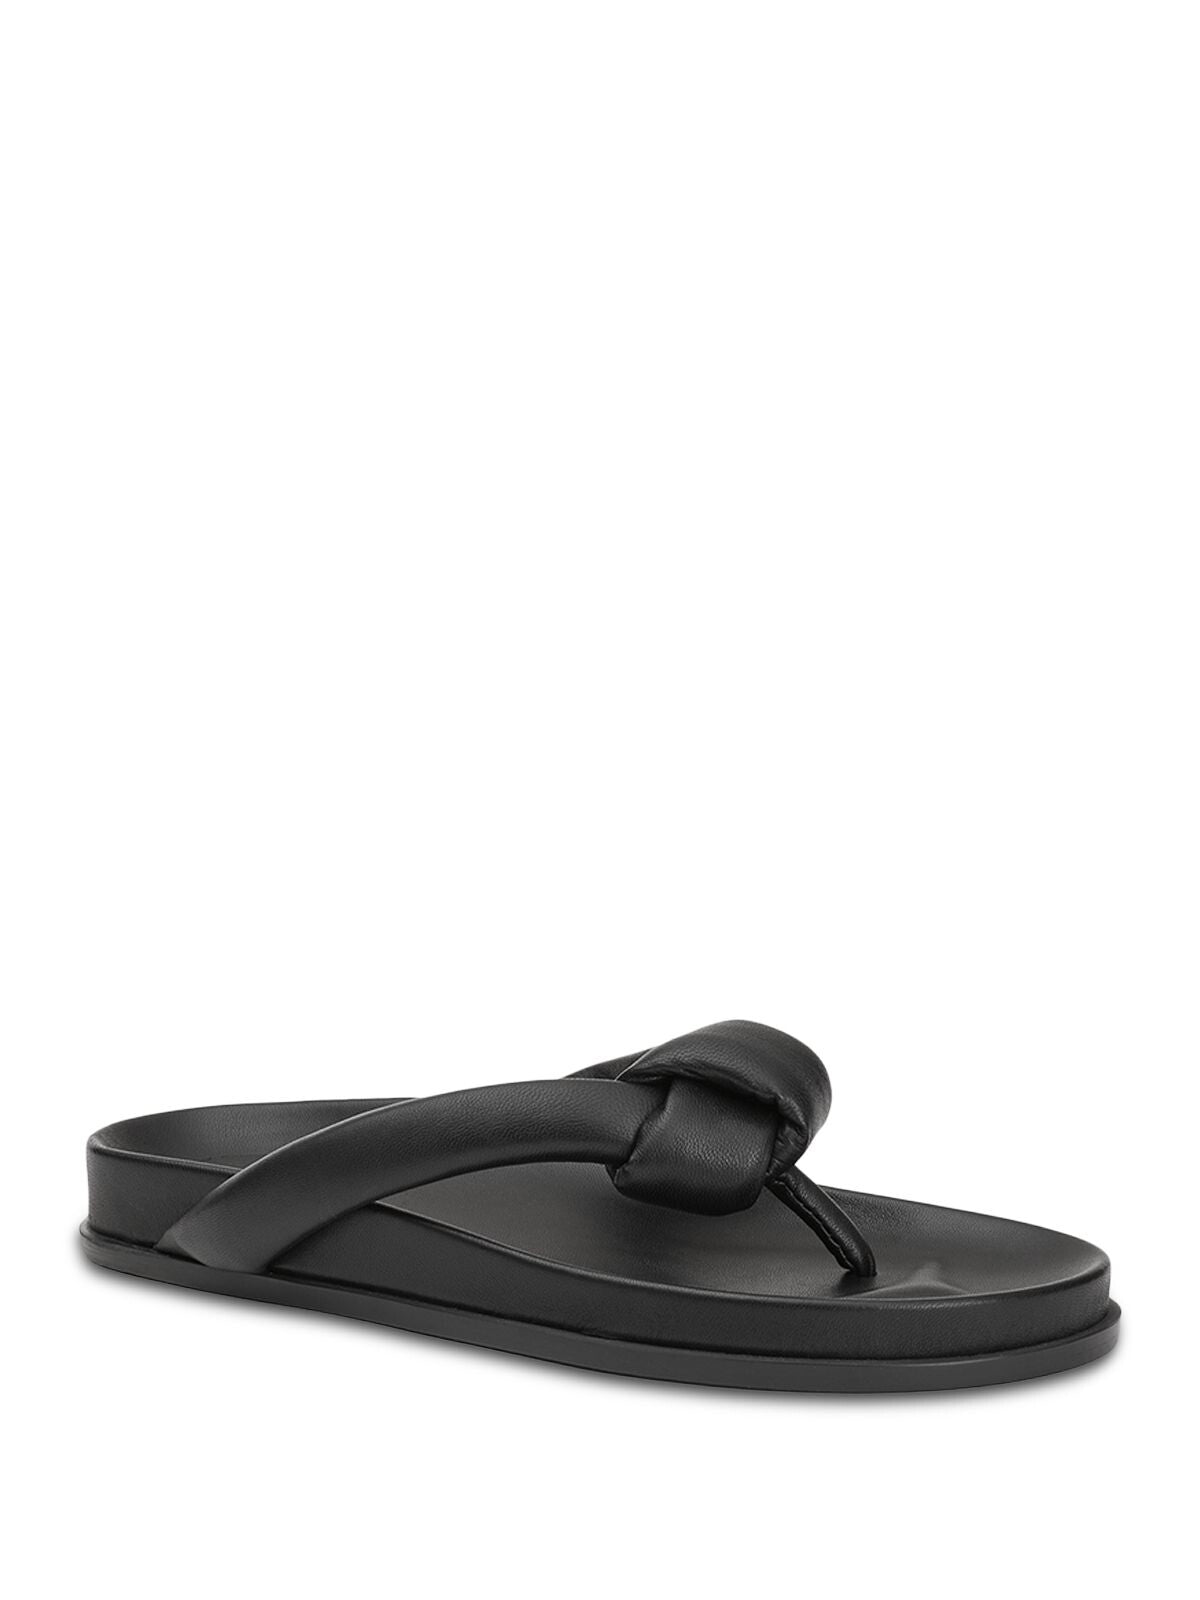 LAFAYETTE 148 NEW YORK Womens Black Knotted Strap Comfort Bristol Almond Toe Slip On Leather Thong Sandals Shoes 38